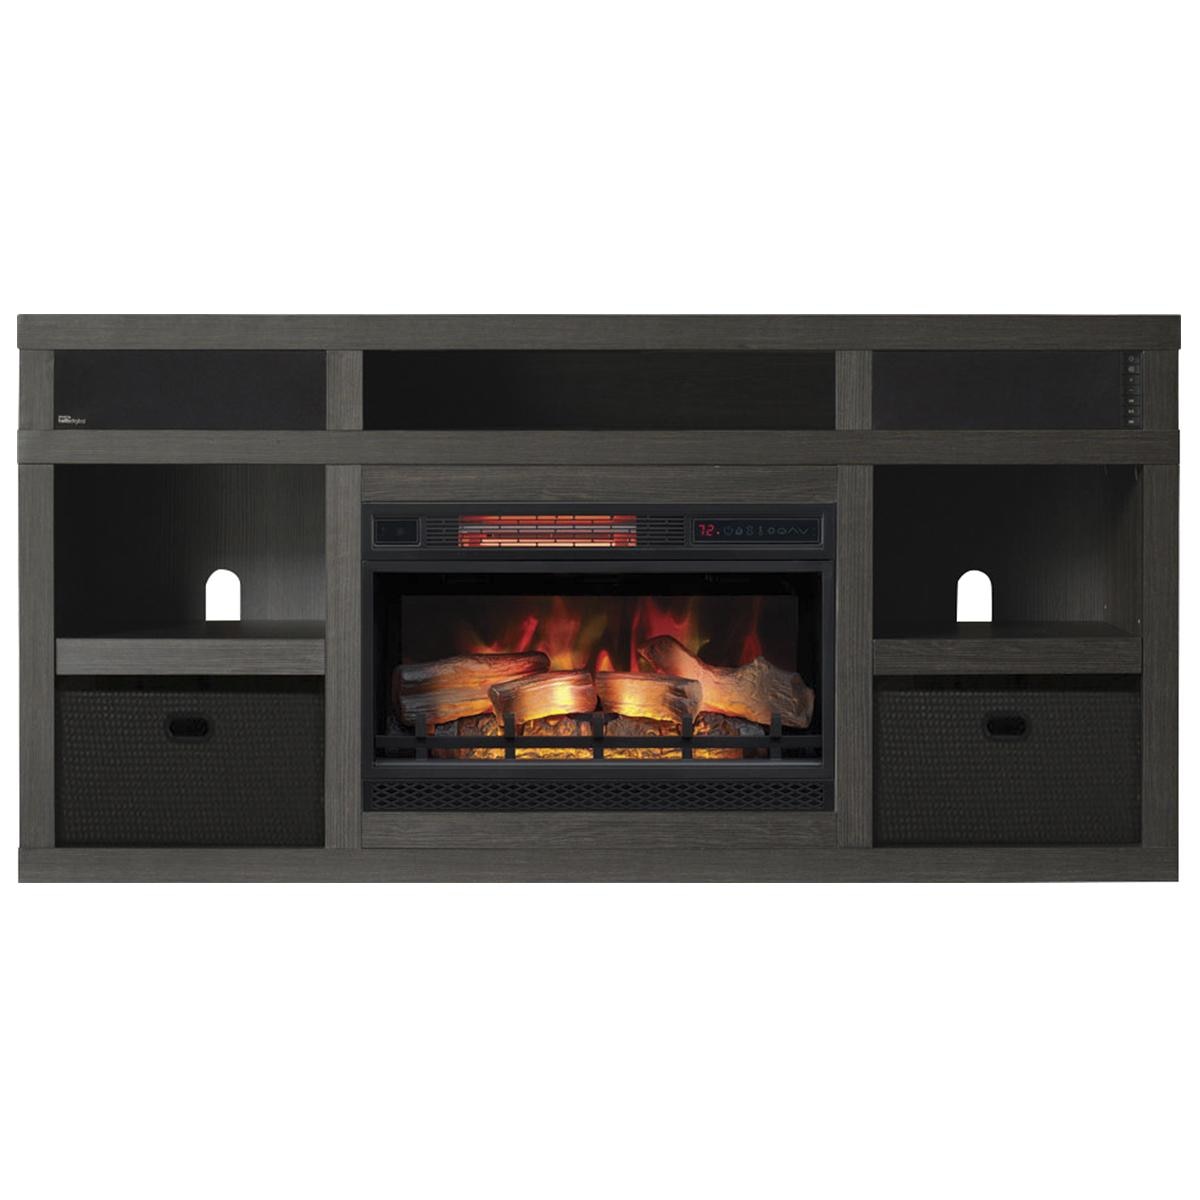 Modern Tv Stand with Fireplace Elegant Fabio Flames Greatlin 3 Piece Fireplace Entertainment Wall